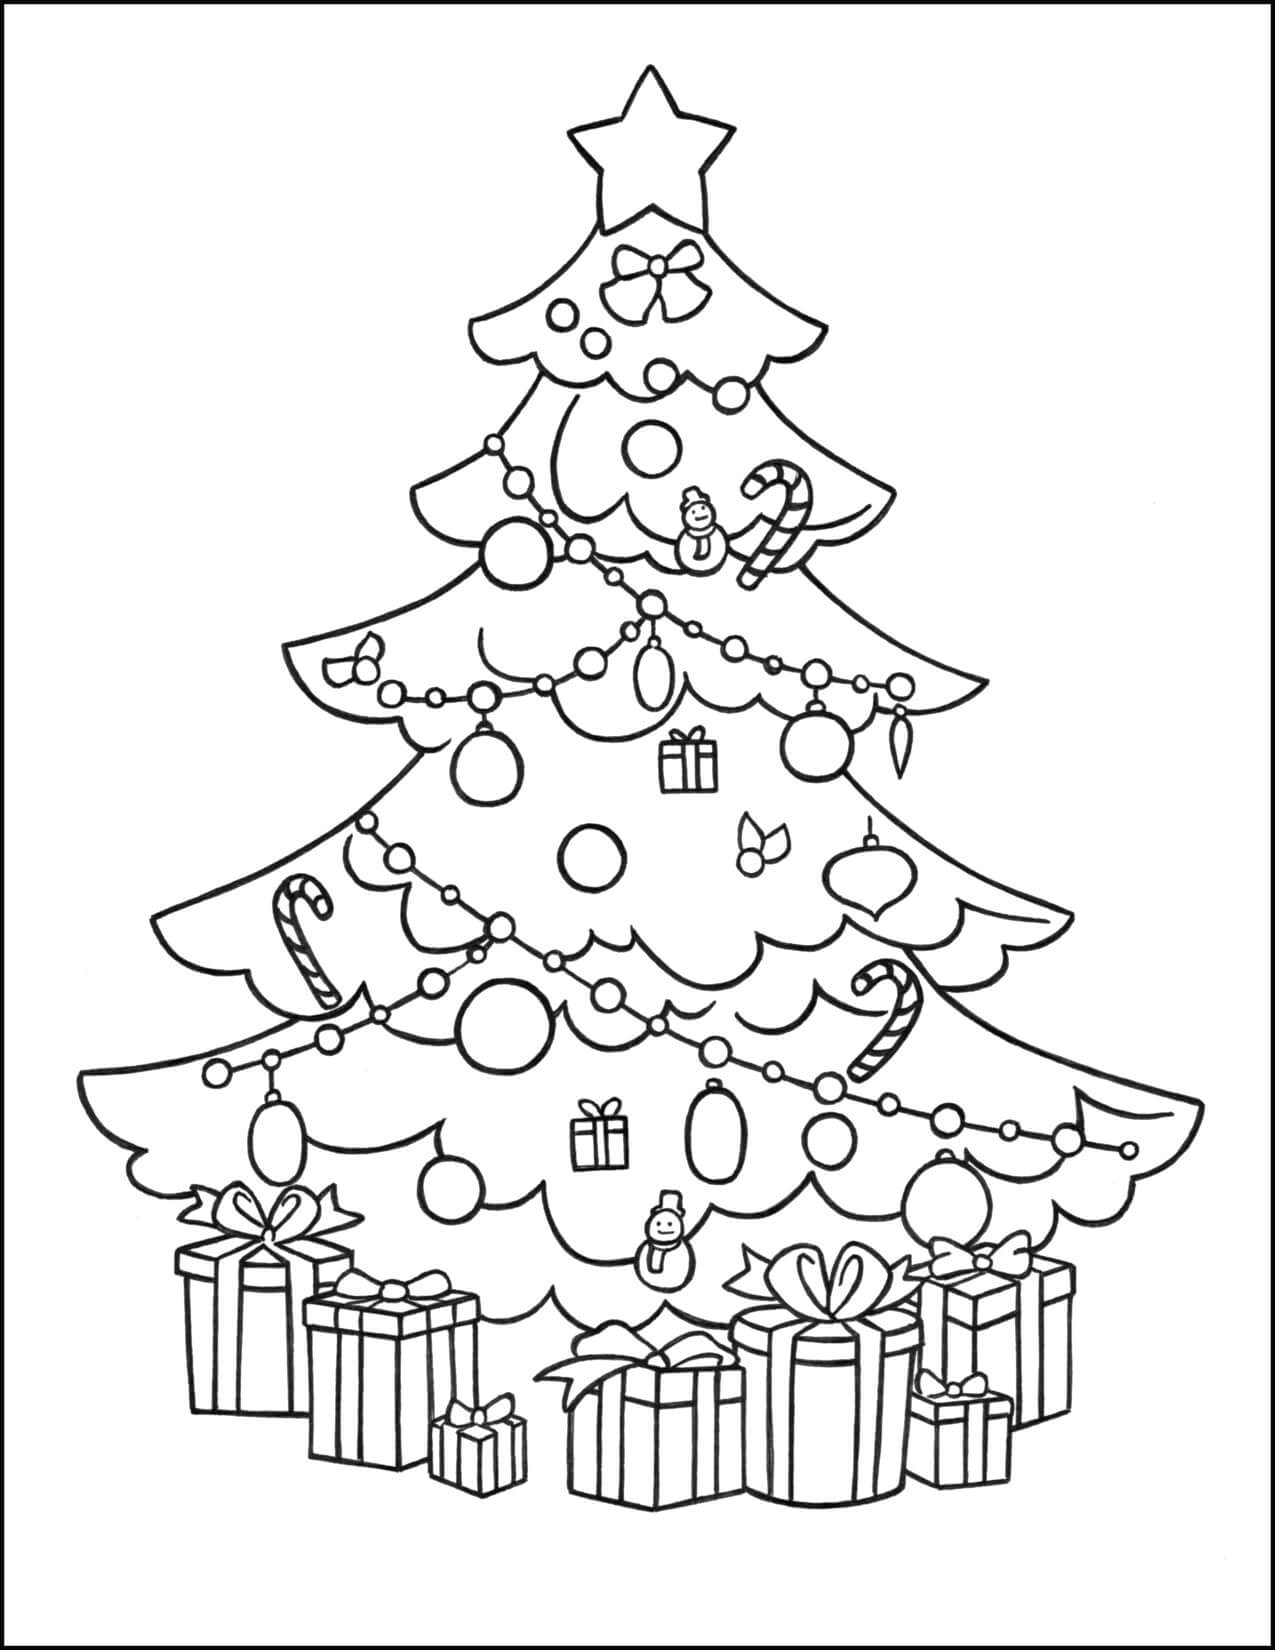 big-christmas-tree-coloring-page-free-printable-coloring-pages-for-kids